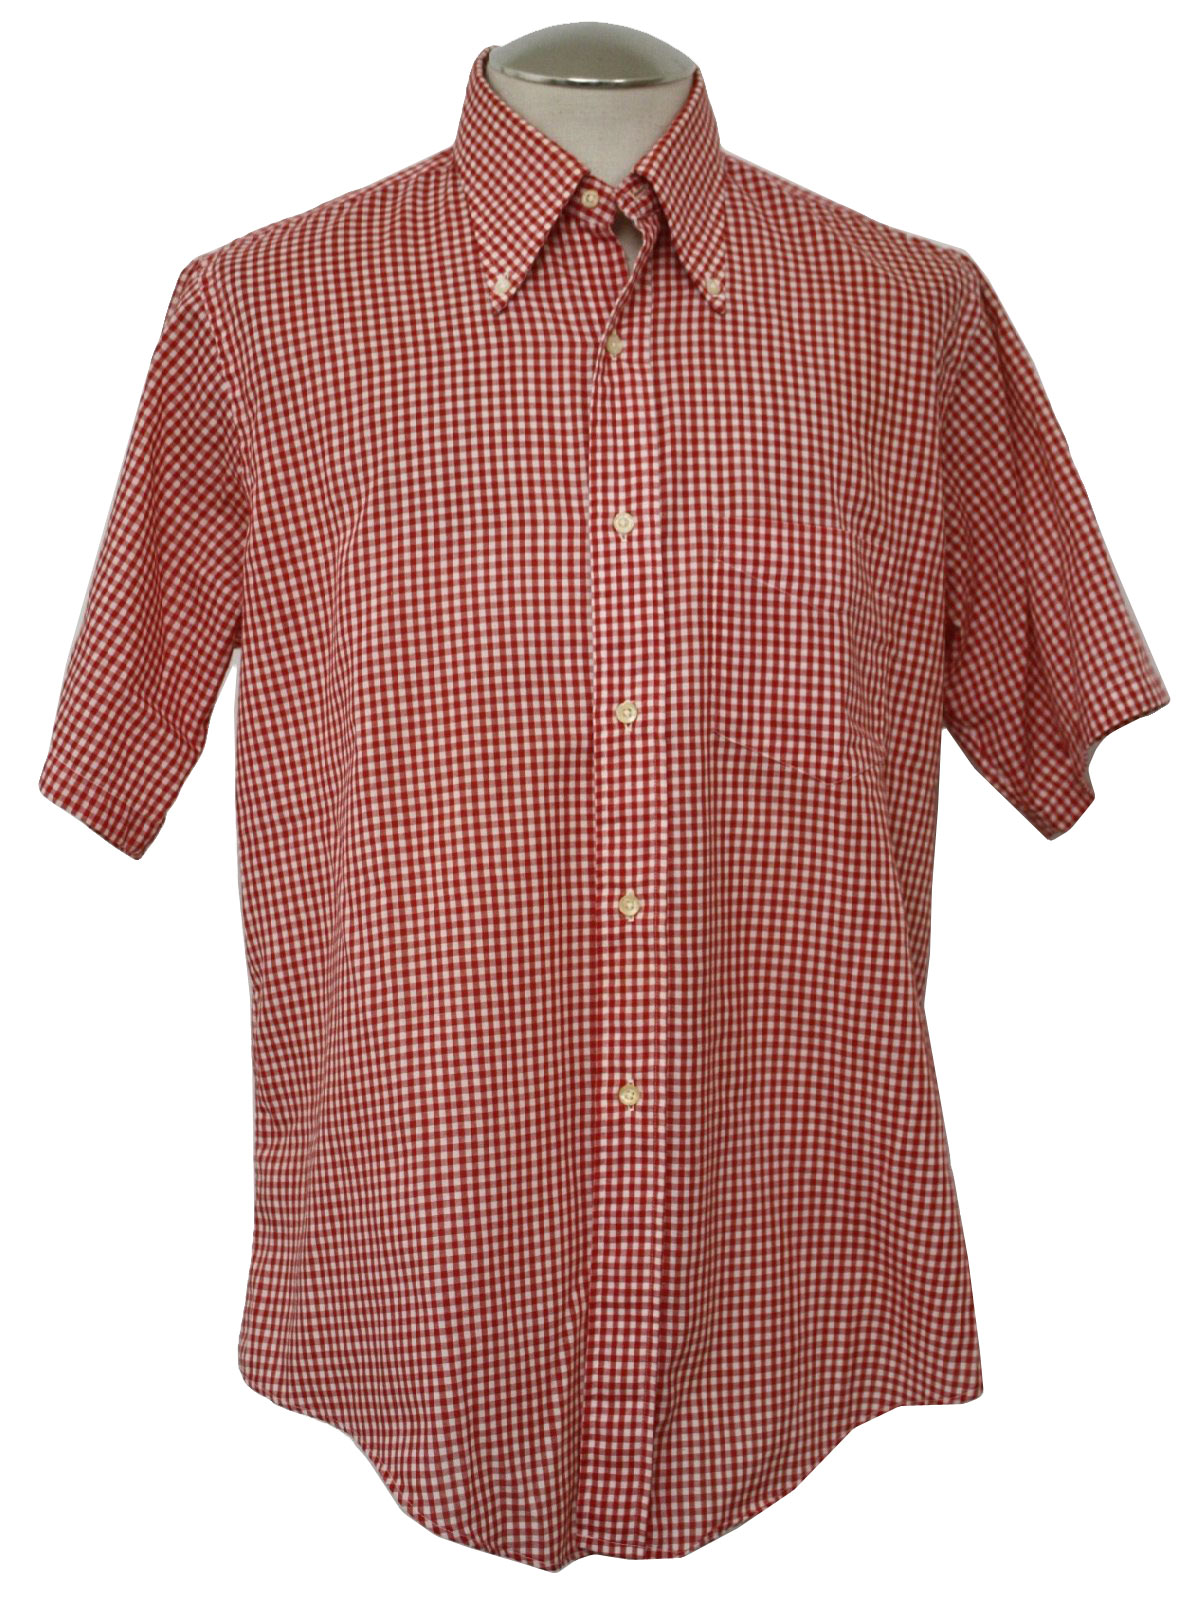 Vintage 60s Shirt: Late 60s -Gant- Mens red, white check cotton ...